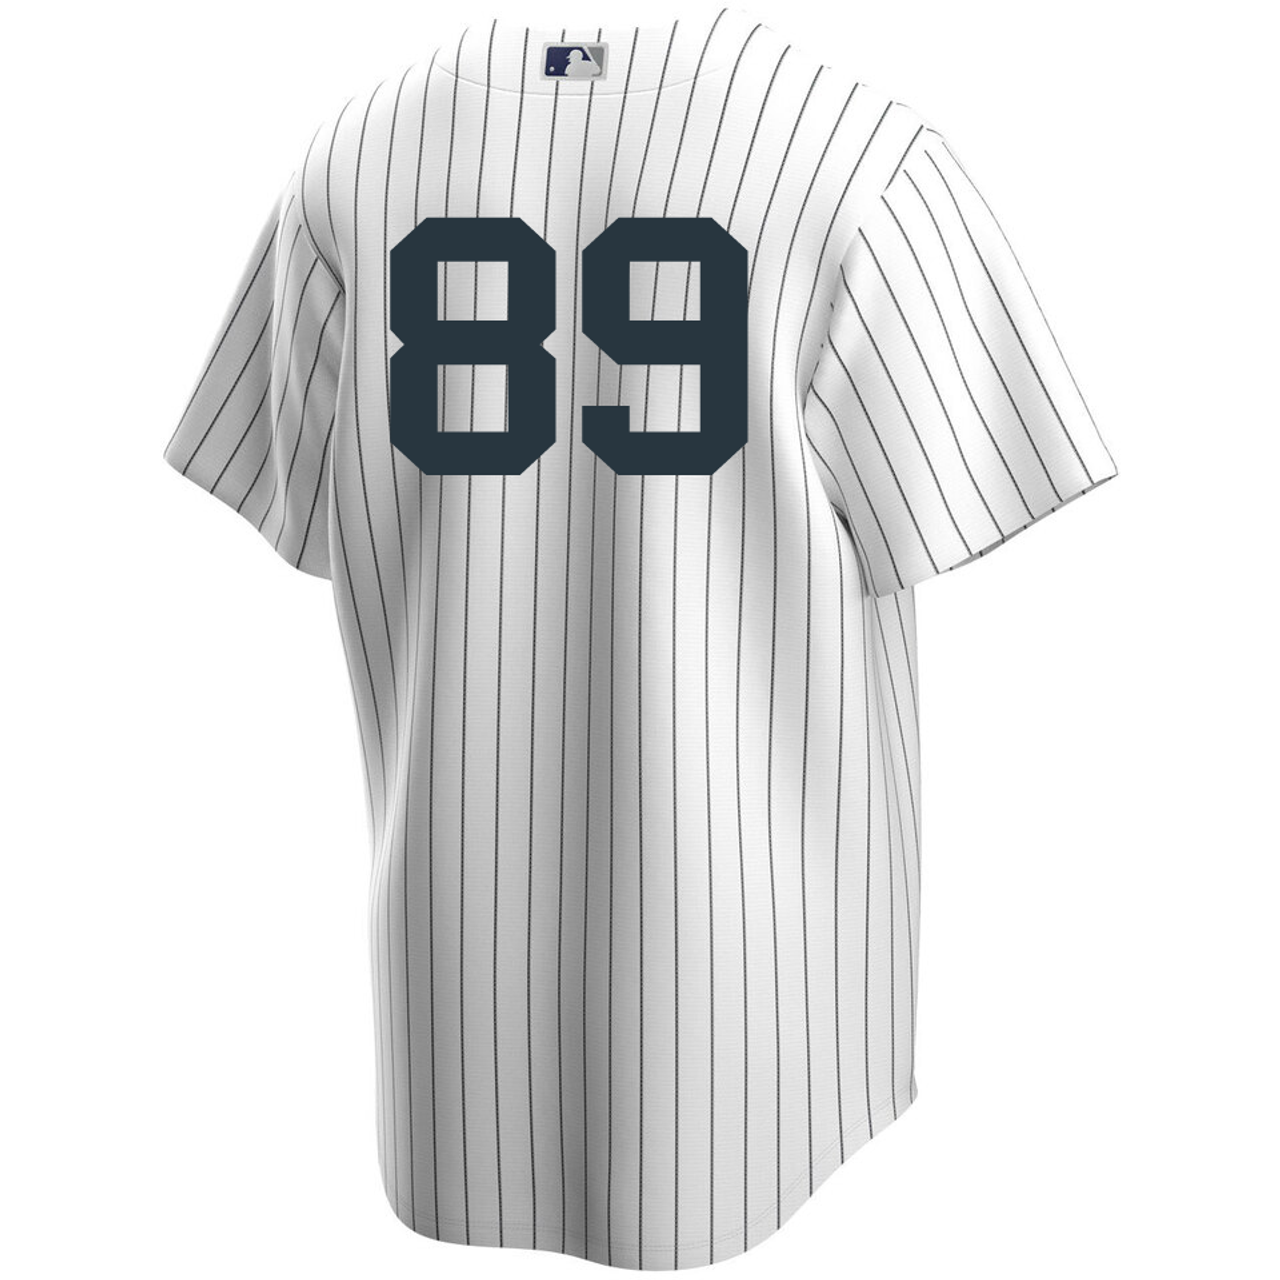 Jasson Dominguez Youth No Name Jersey - NY Yankees Number